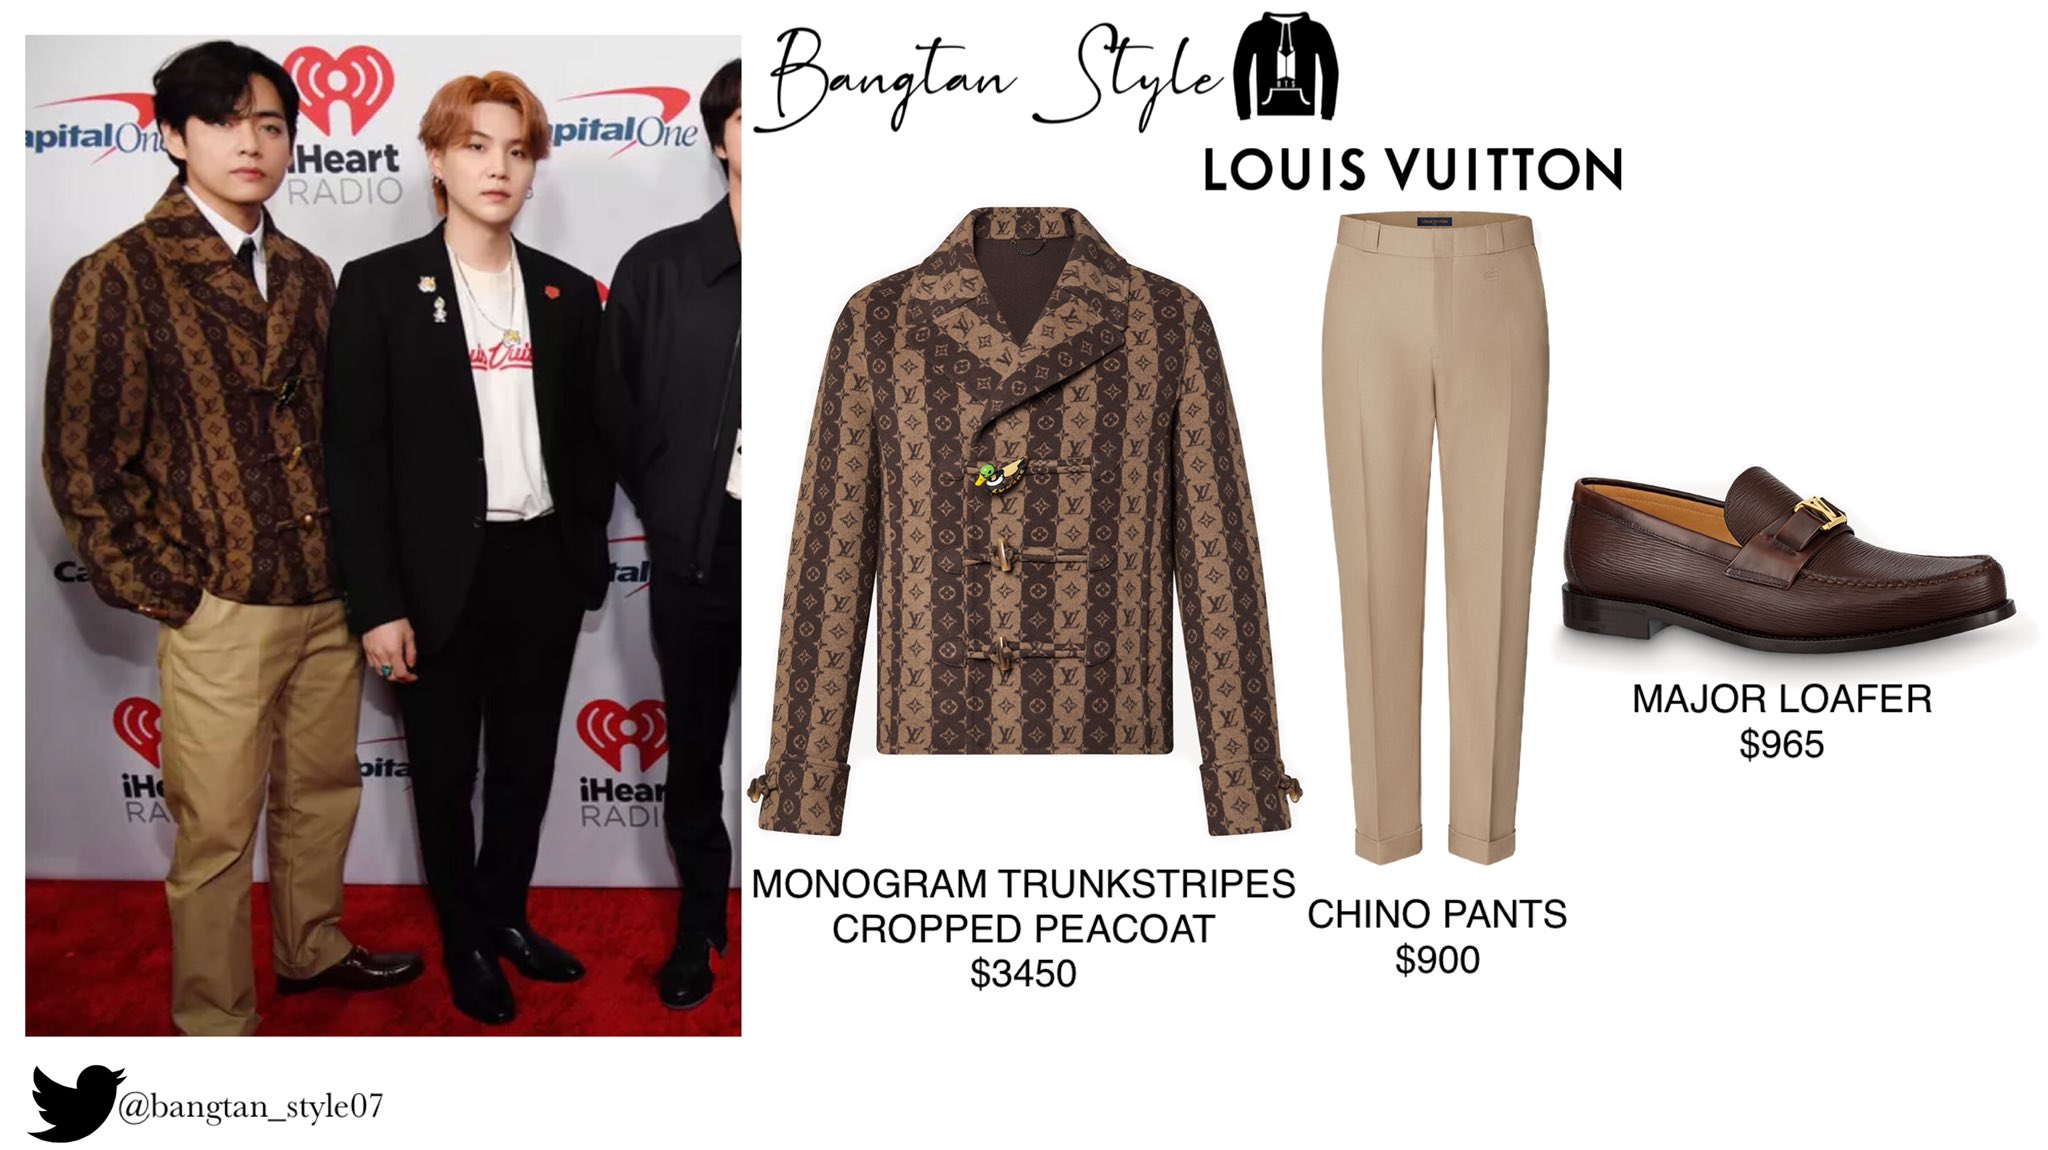 Bangtan Style⁷ (slow) on X: BTS x Coldplay Twitter Posts 210923  BTS at  Korean Cultural Center in New York [ Louis Vuitton ] #JHOPE #SUGA #JIN  #JIMIN #BTS @BTS_twt  / X